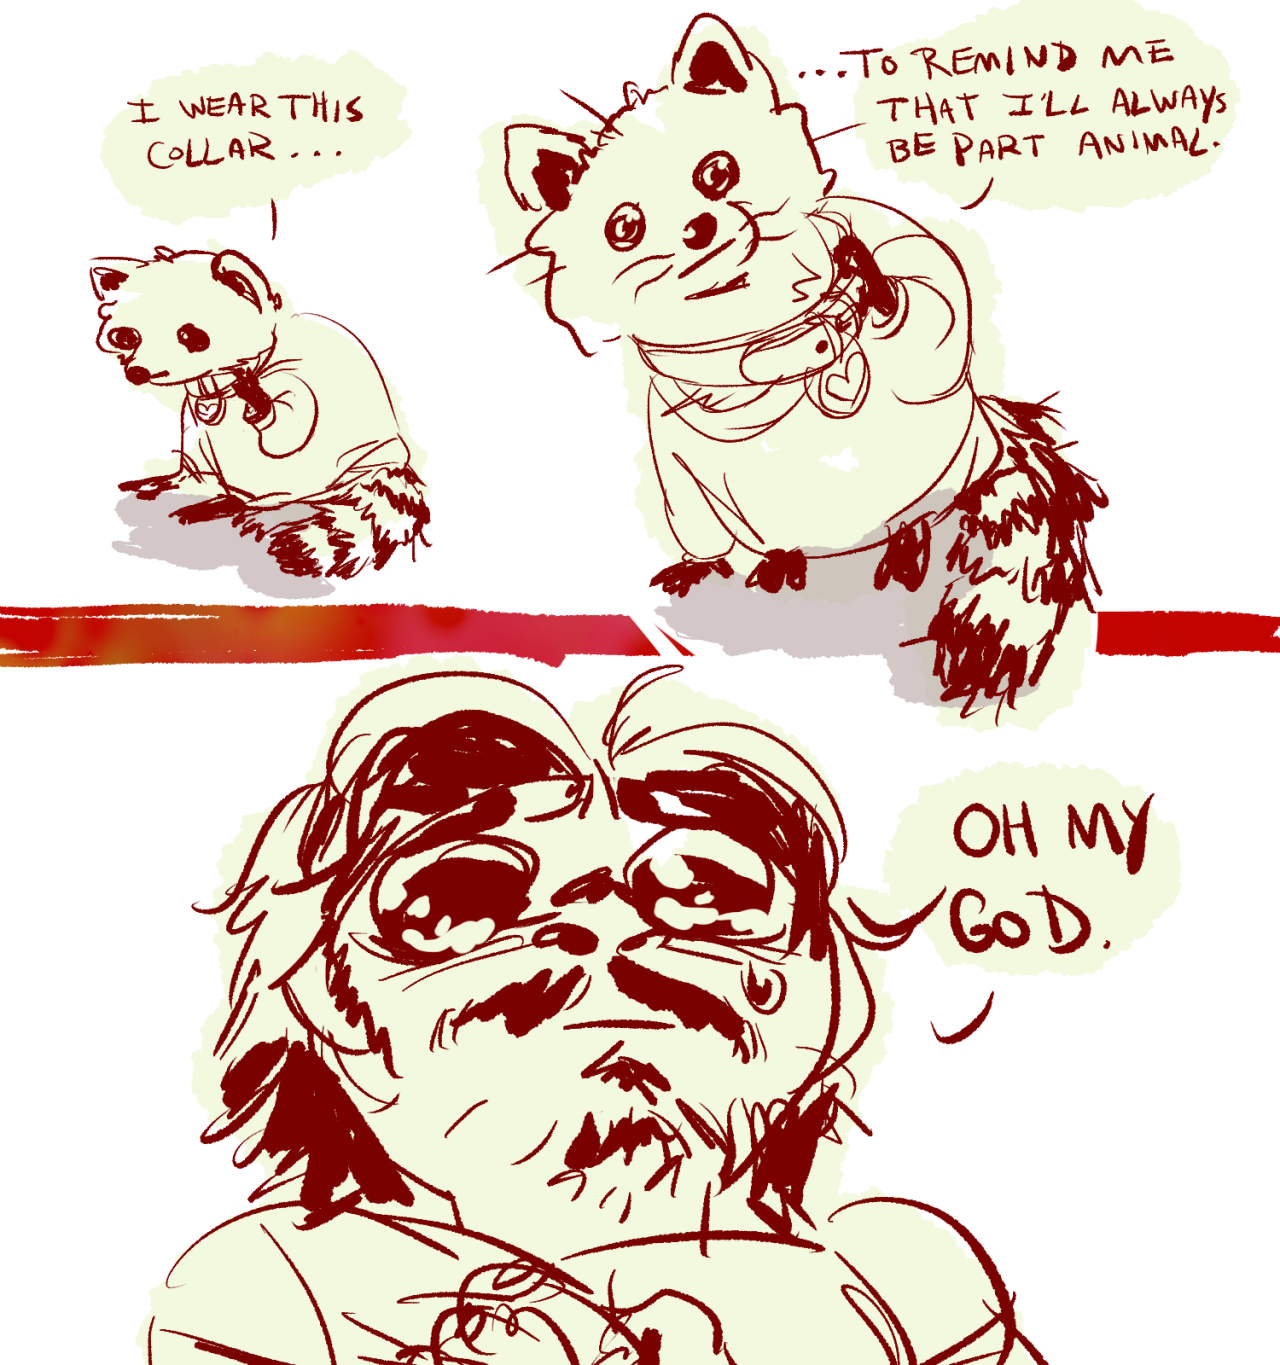 a comic of a raccoon wearing a collar and an overly tshirt looks up and says 'i wear this collar to remind me that i will always be part animal' and the followup panel has mac with big anime sad eyes crying saying oh my god